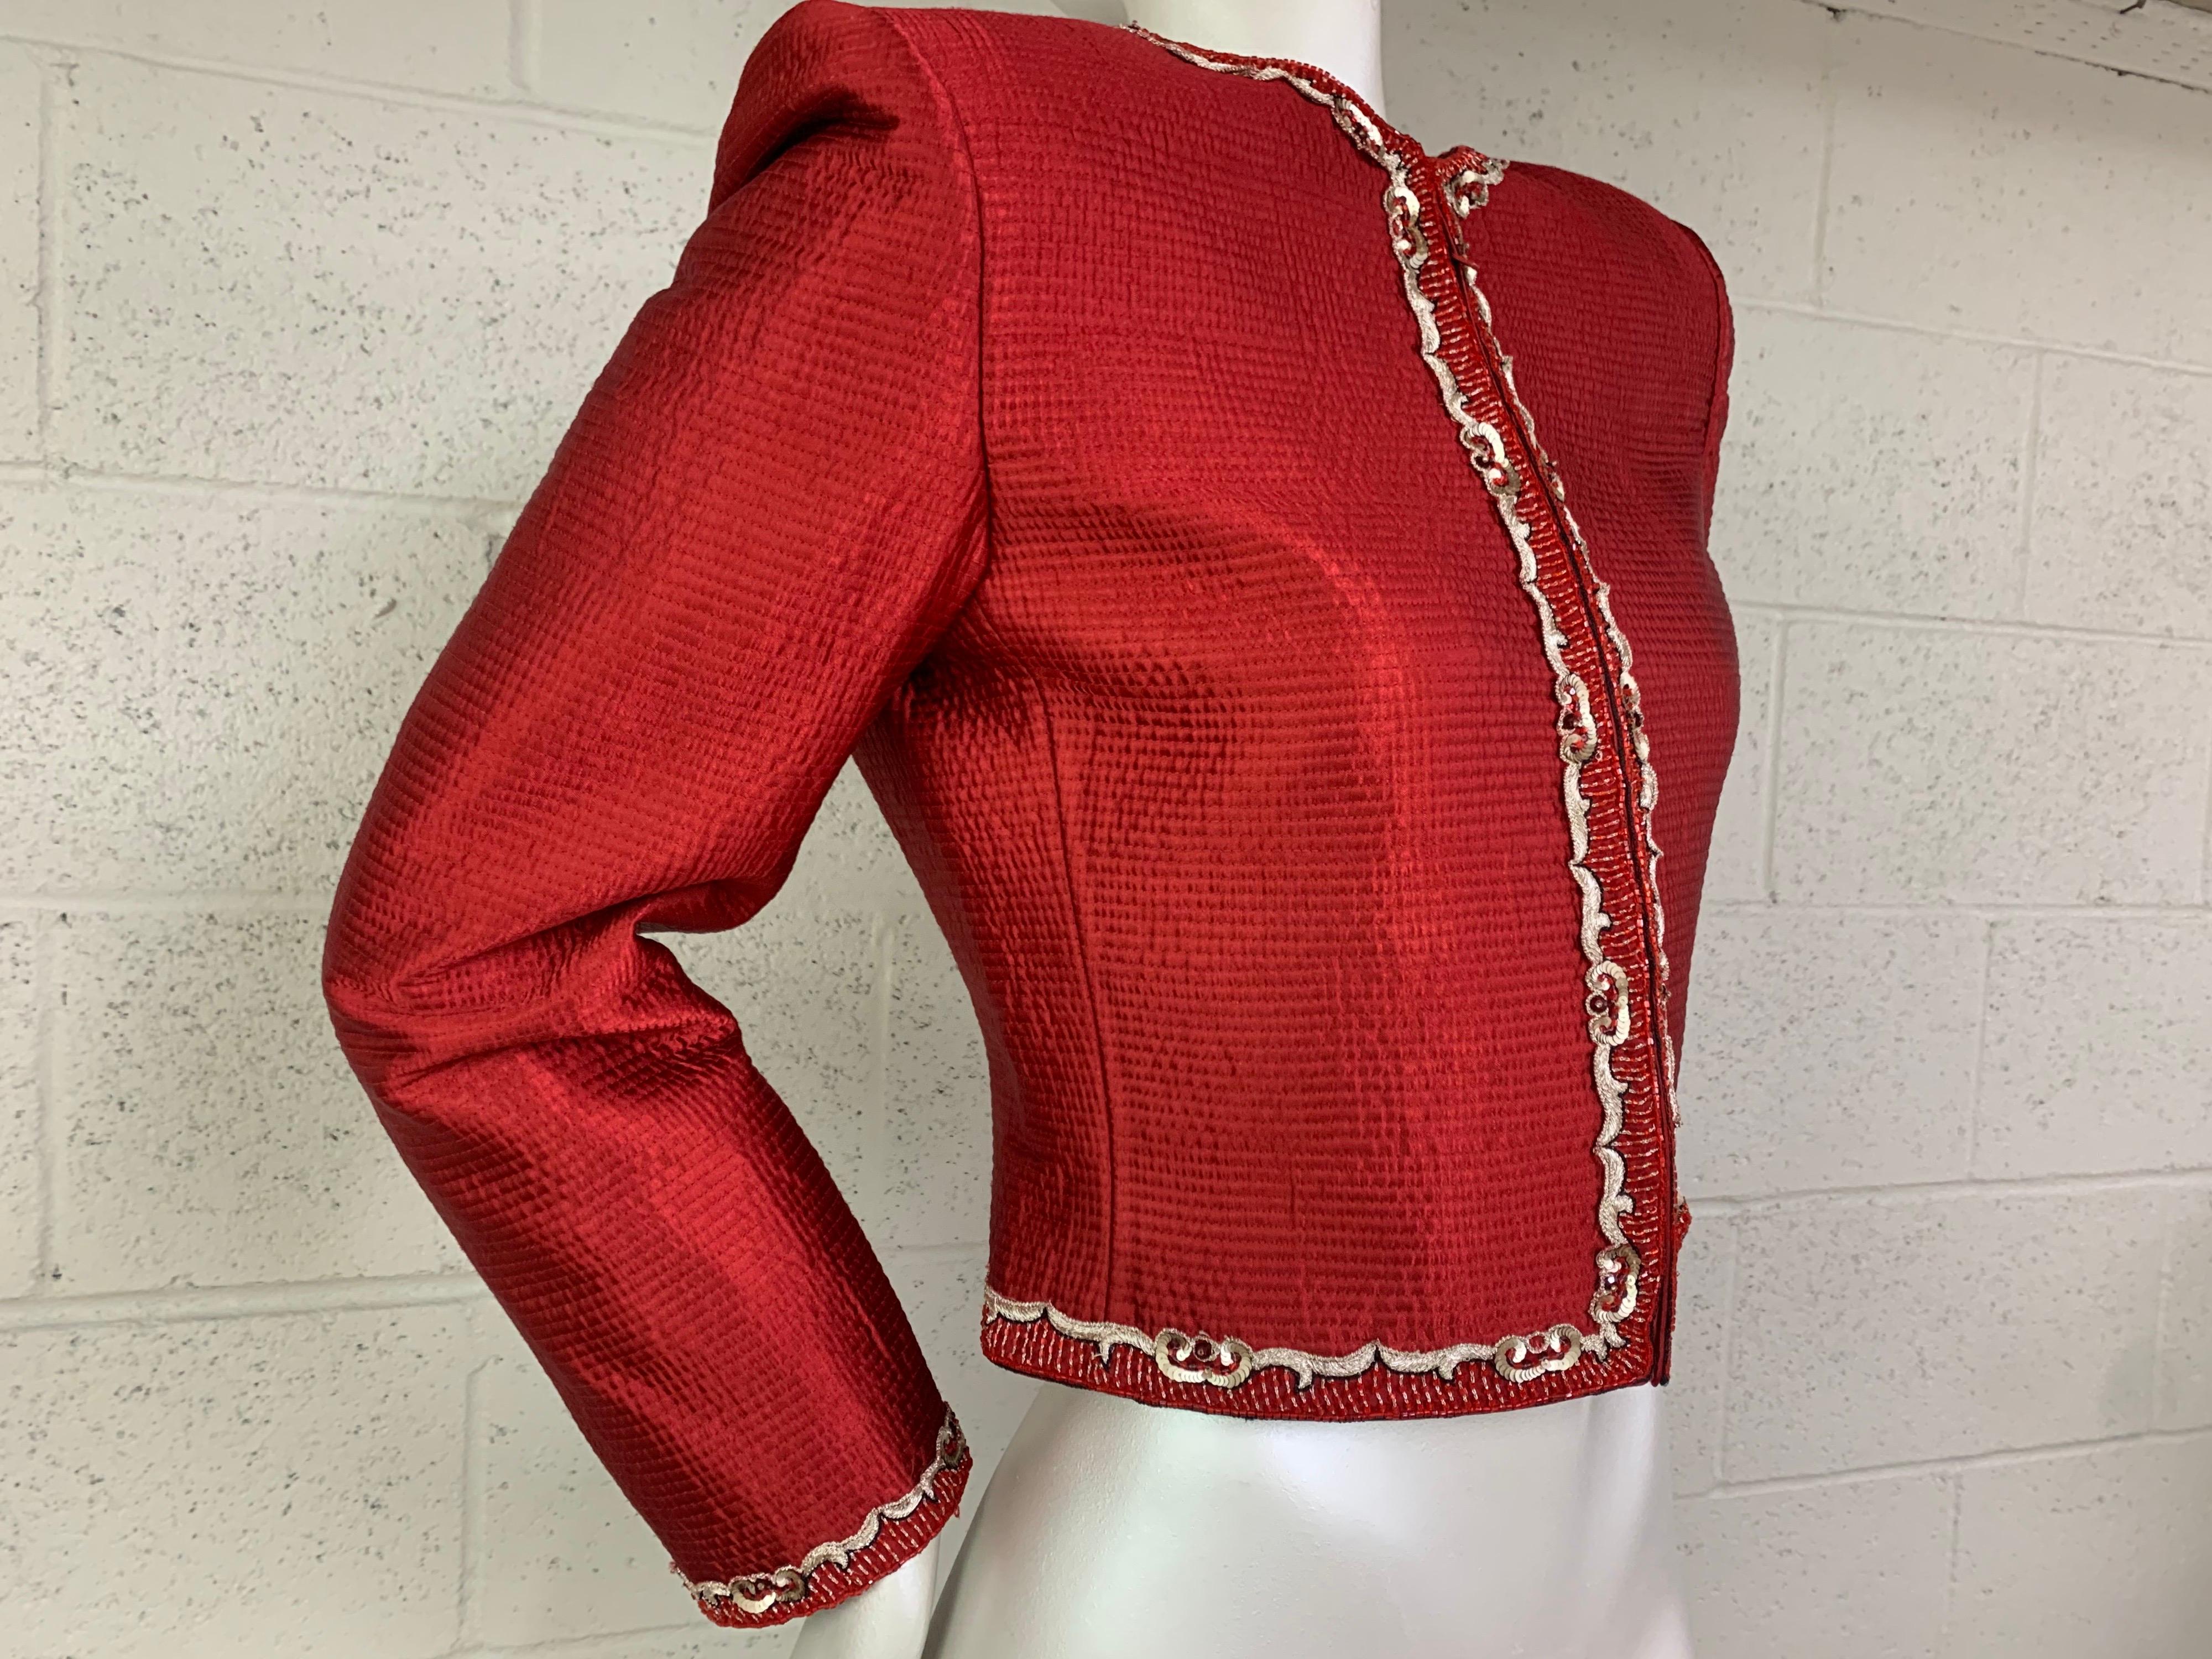 A stunning 1980s Mary McFadden Couture red textured silk zip-front jacket with a strong shoulder silhouette and embroidered tracery trim. Originally purchased at Bergdorf Goodman. Size 10. 